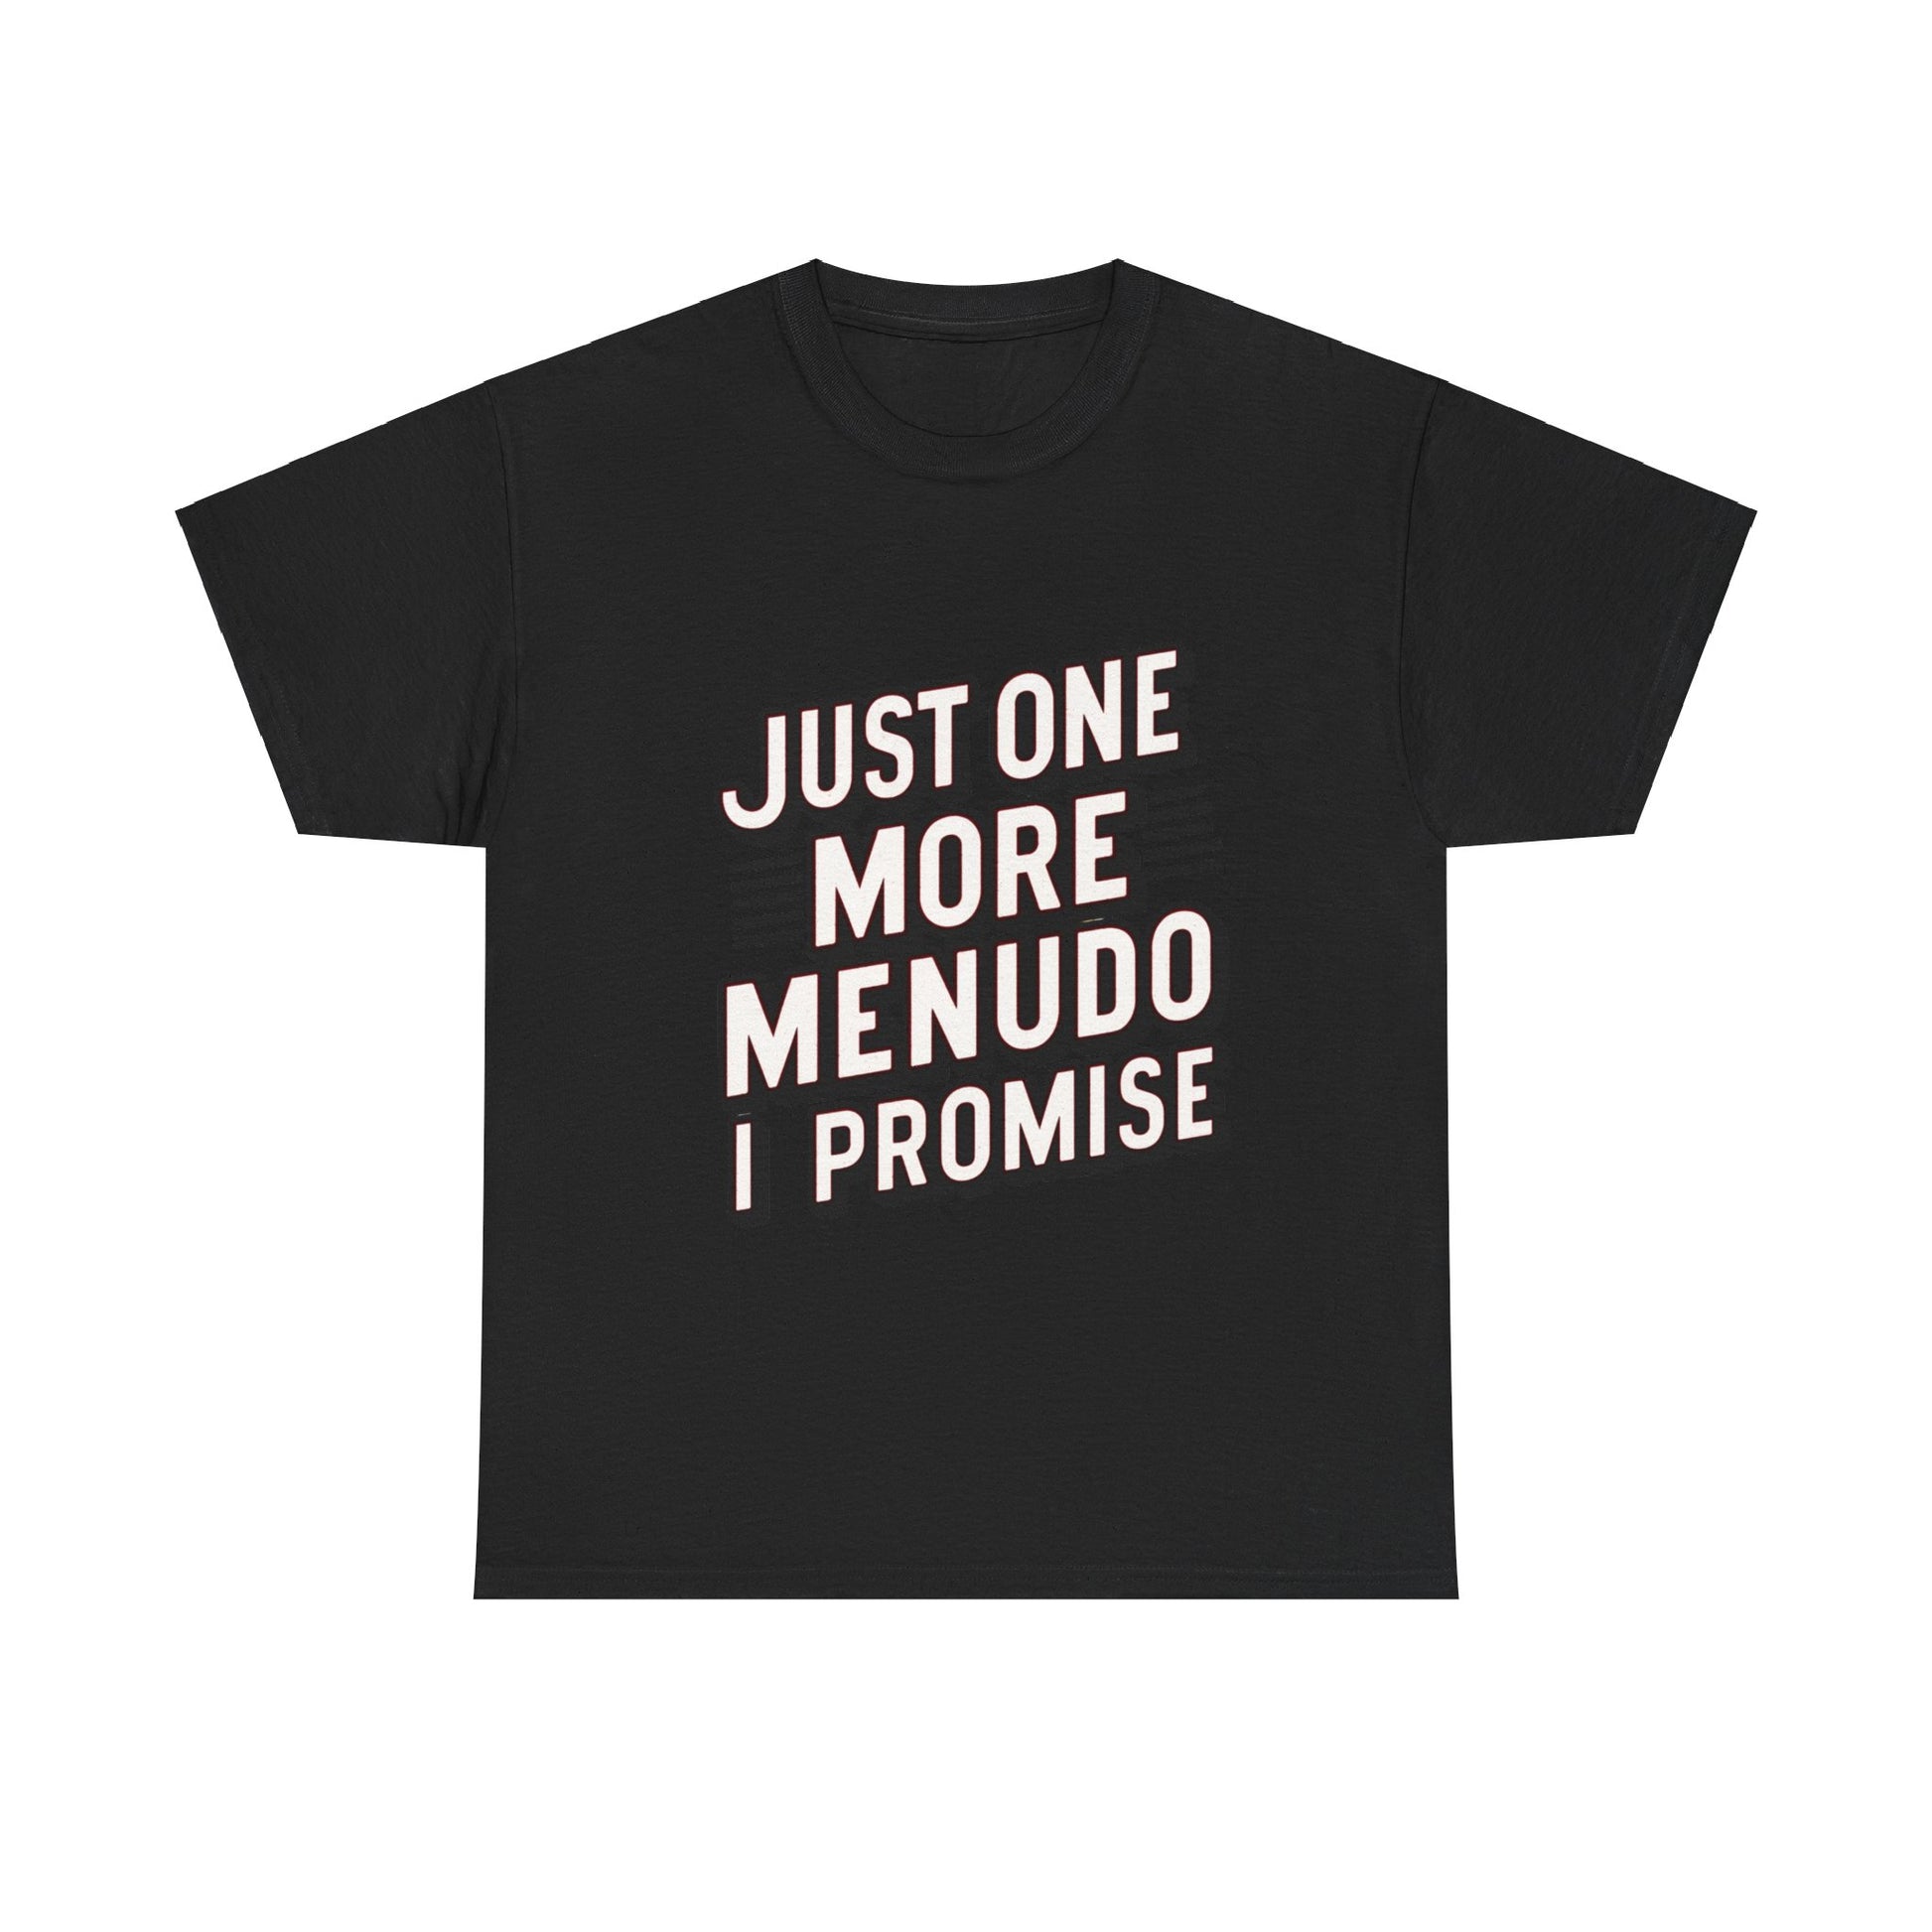 Just One More Menudo I Promise Mexican Food Graphic Unisex Heavy Cotton Tee Cotton Funny Humorous Graphic Soft Premium Unisex Men Women Black T-shirt Birthday Gift-1